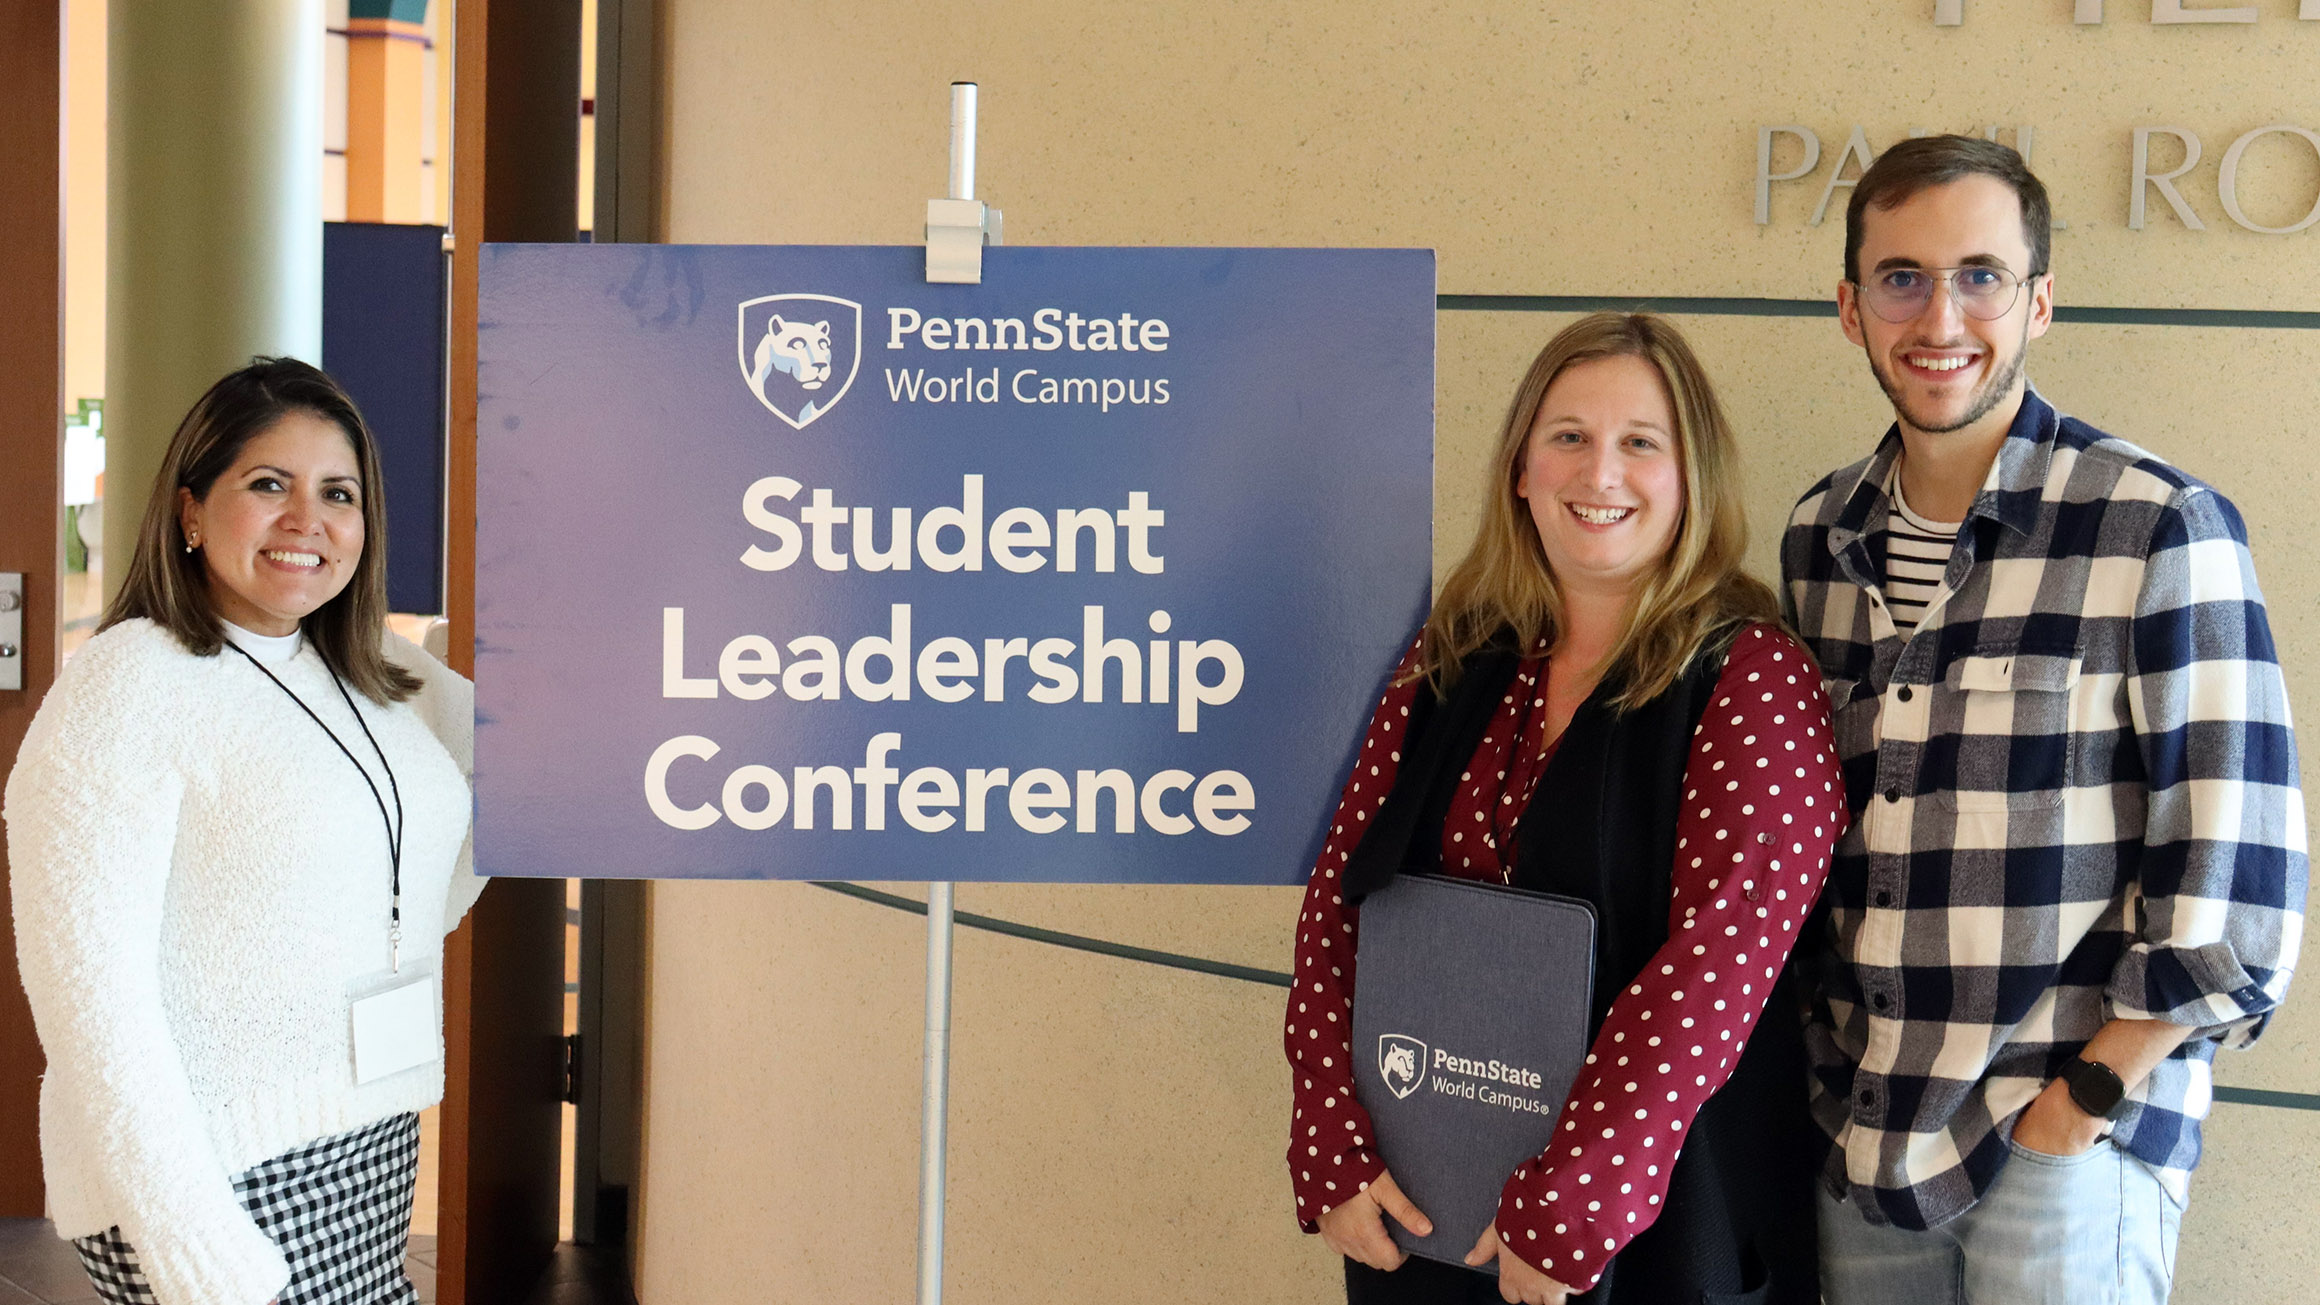 Three students flank the sign "Penn State World Campus Student Leadership Conference"